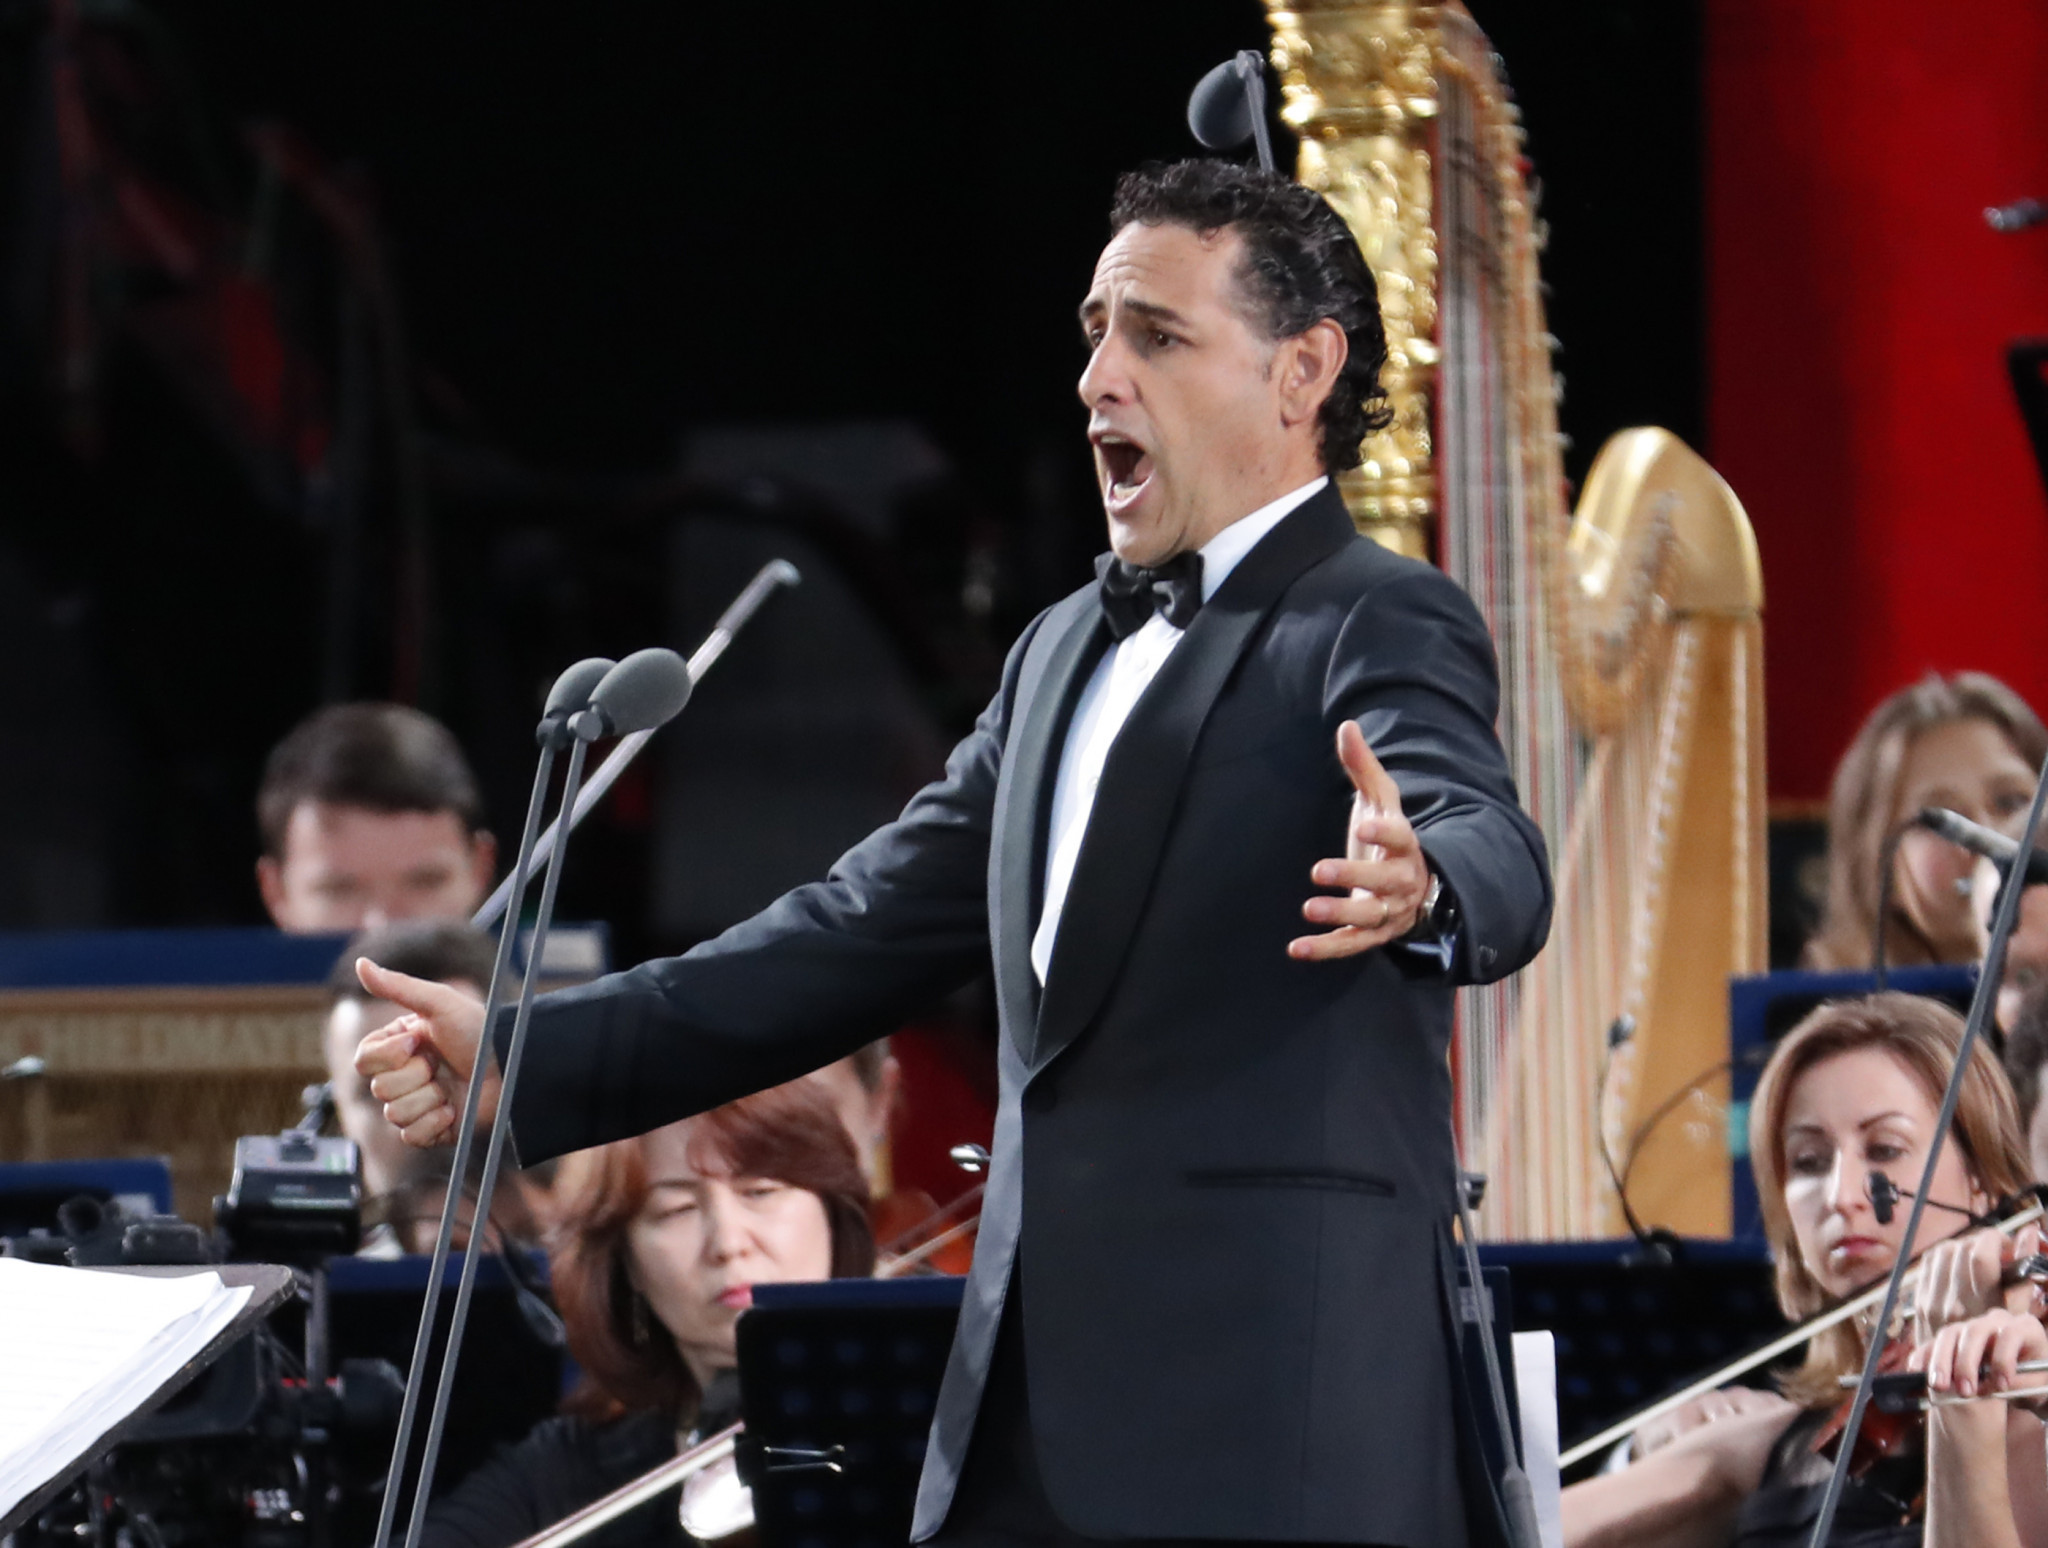 Peruvian opera star confirmed for Lima 2019 Opening Ceremony